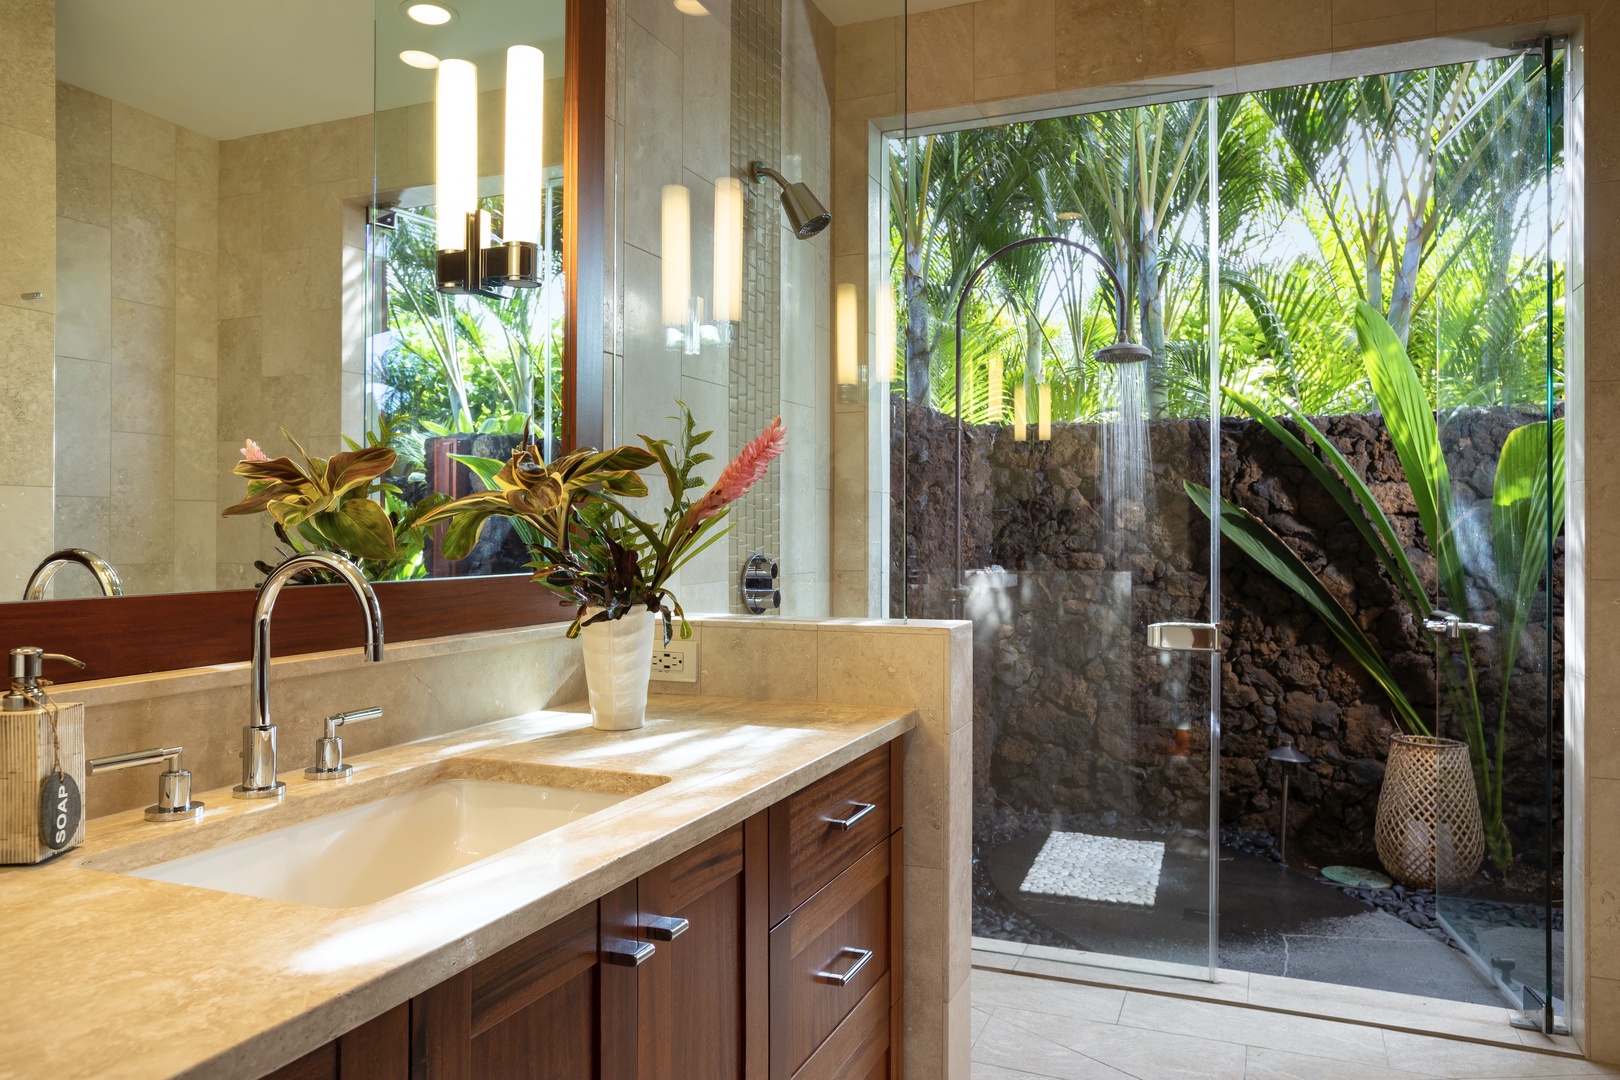 Kailua Kona Vacation Rentals, 4BD Kulanakauhale (3558) Estate Home at Four Seasons Resort at Hualalai - Guest bedroom en-suite bath with indoor and outdoor showers.